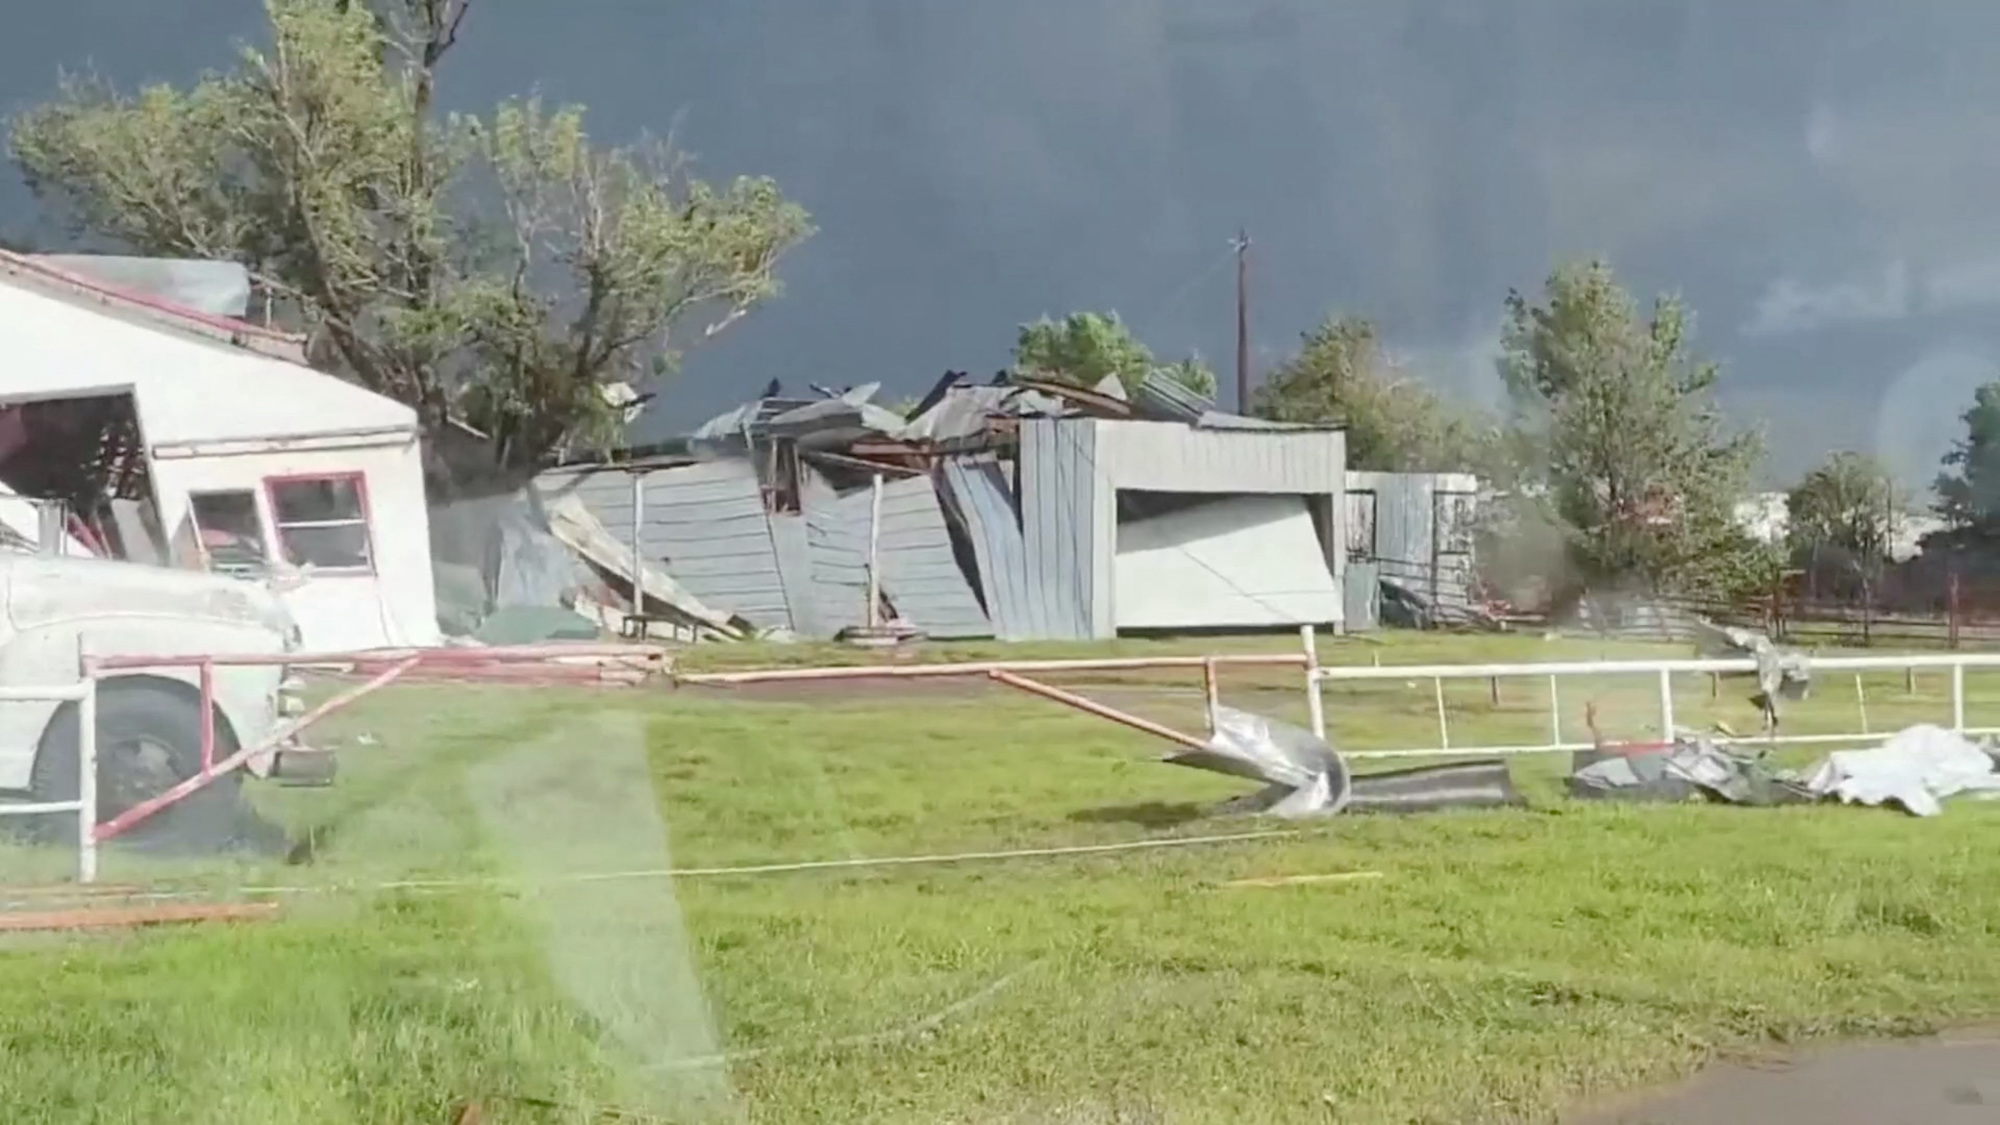 A view of a damaged site in Perryton as the town gets struck by a tornado on Thursday.